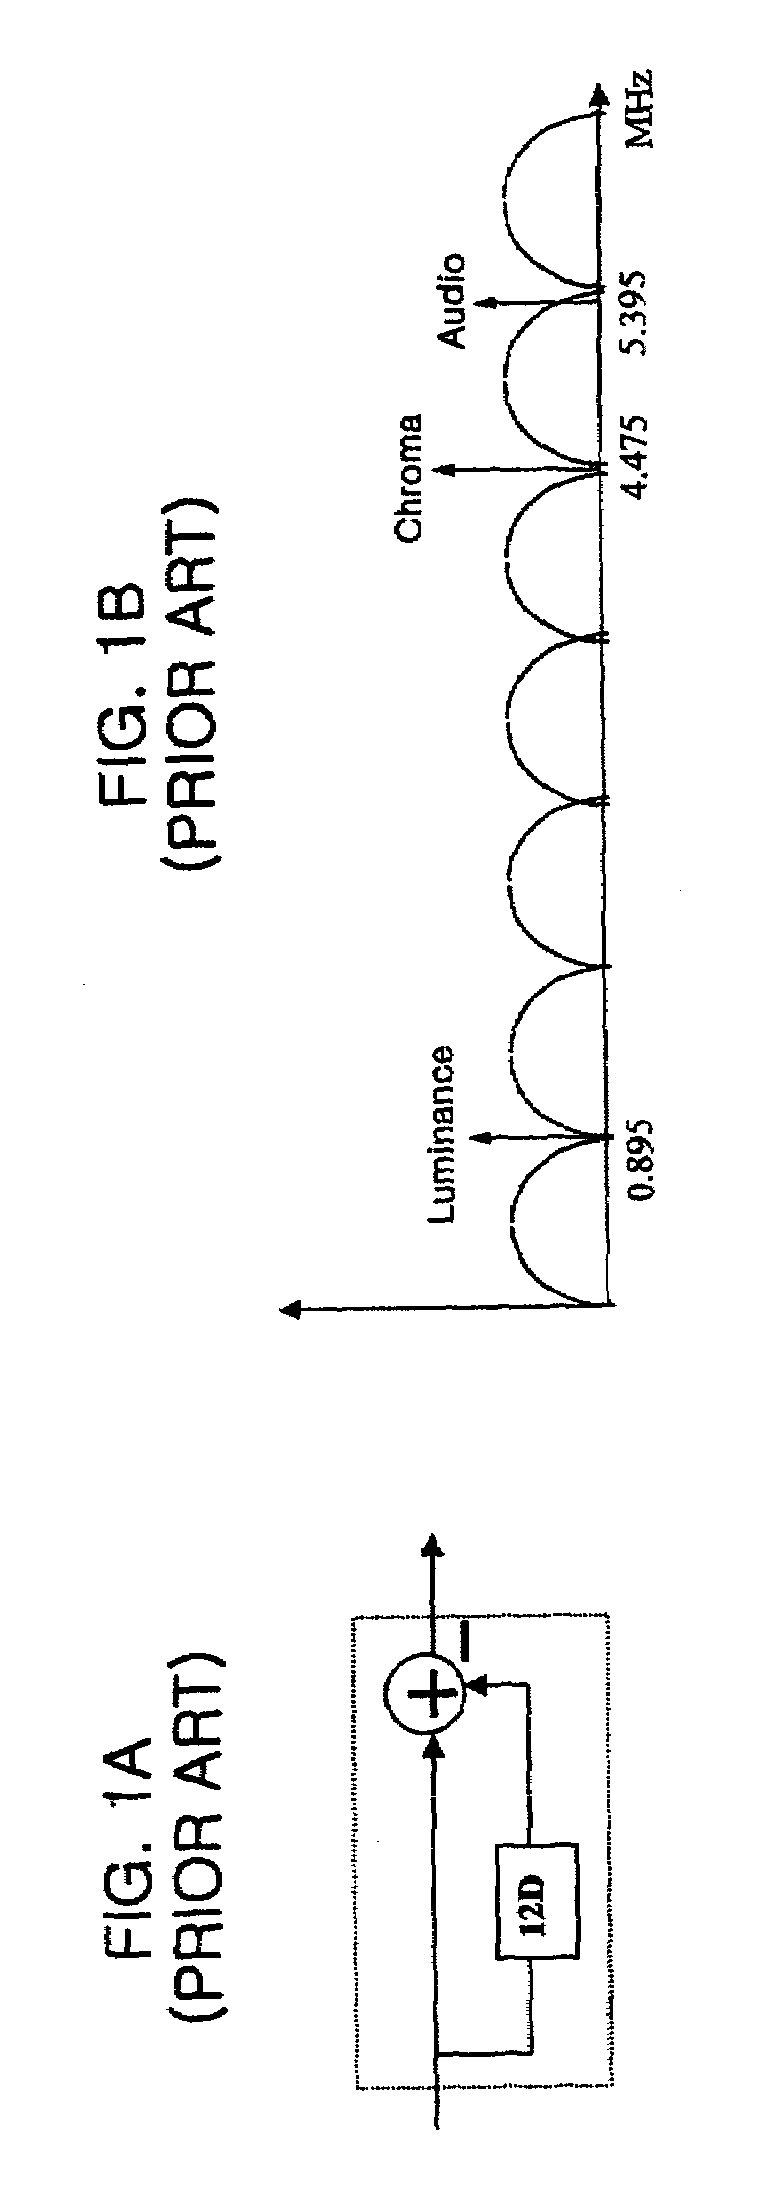 Methods and apparatus for removing NTSC signals from a digital television signal